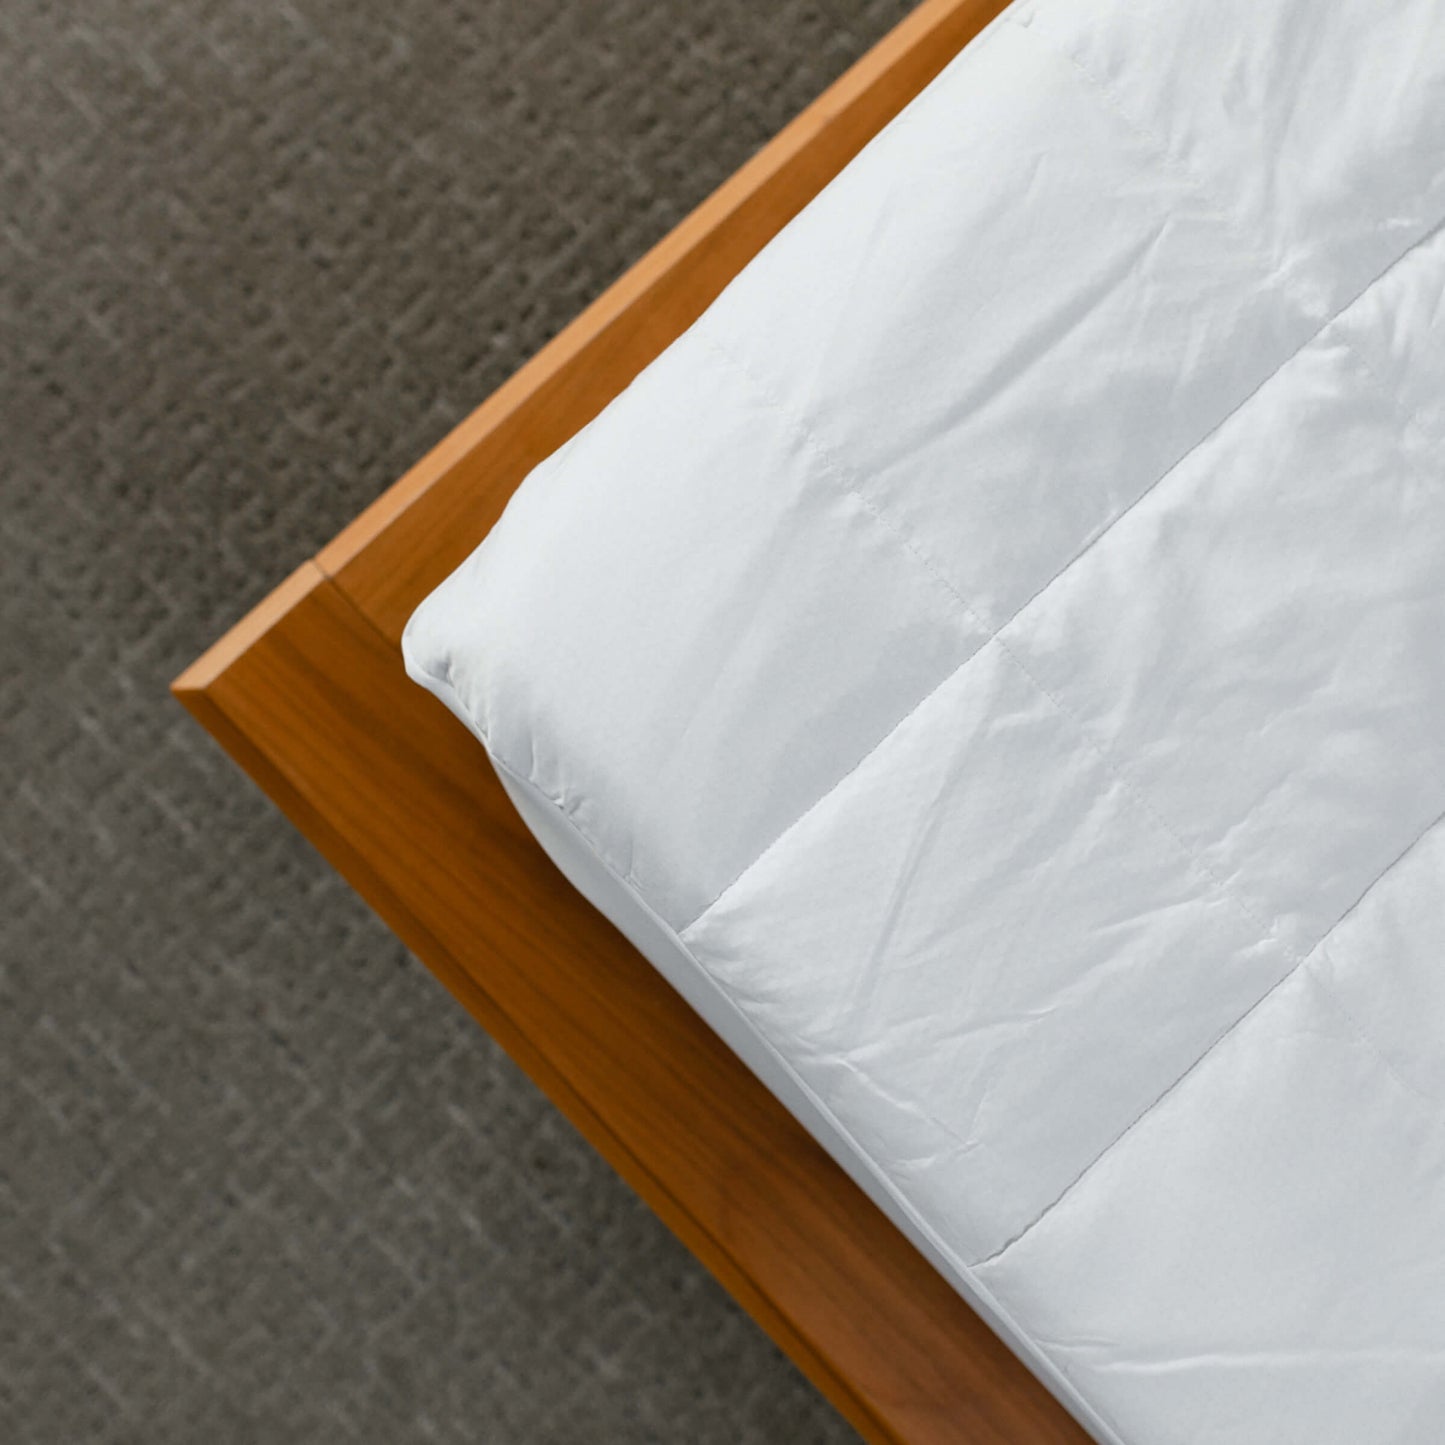 Detailed view of the Slumber Cloud Core Mattress Pad on a wood framed bed